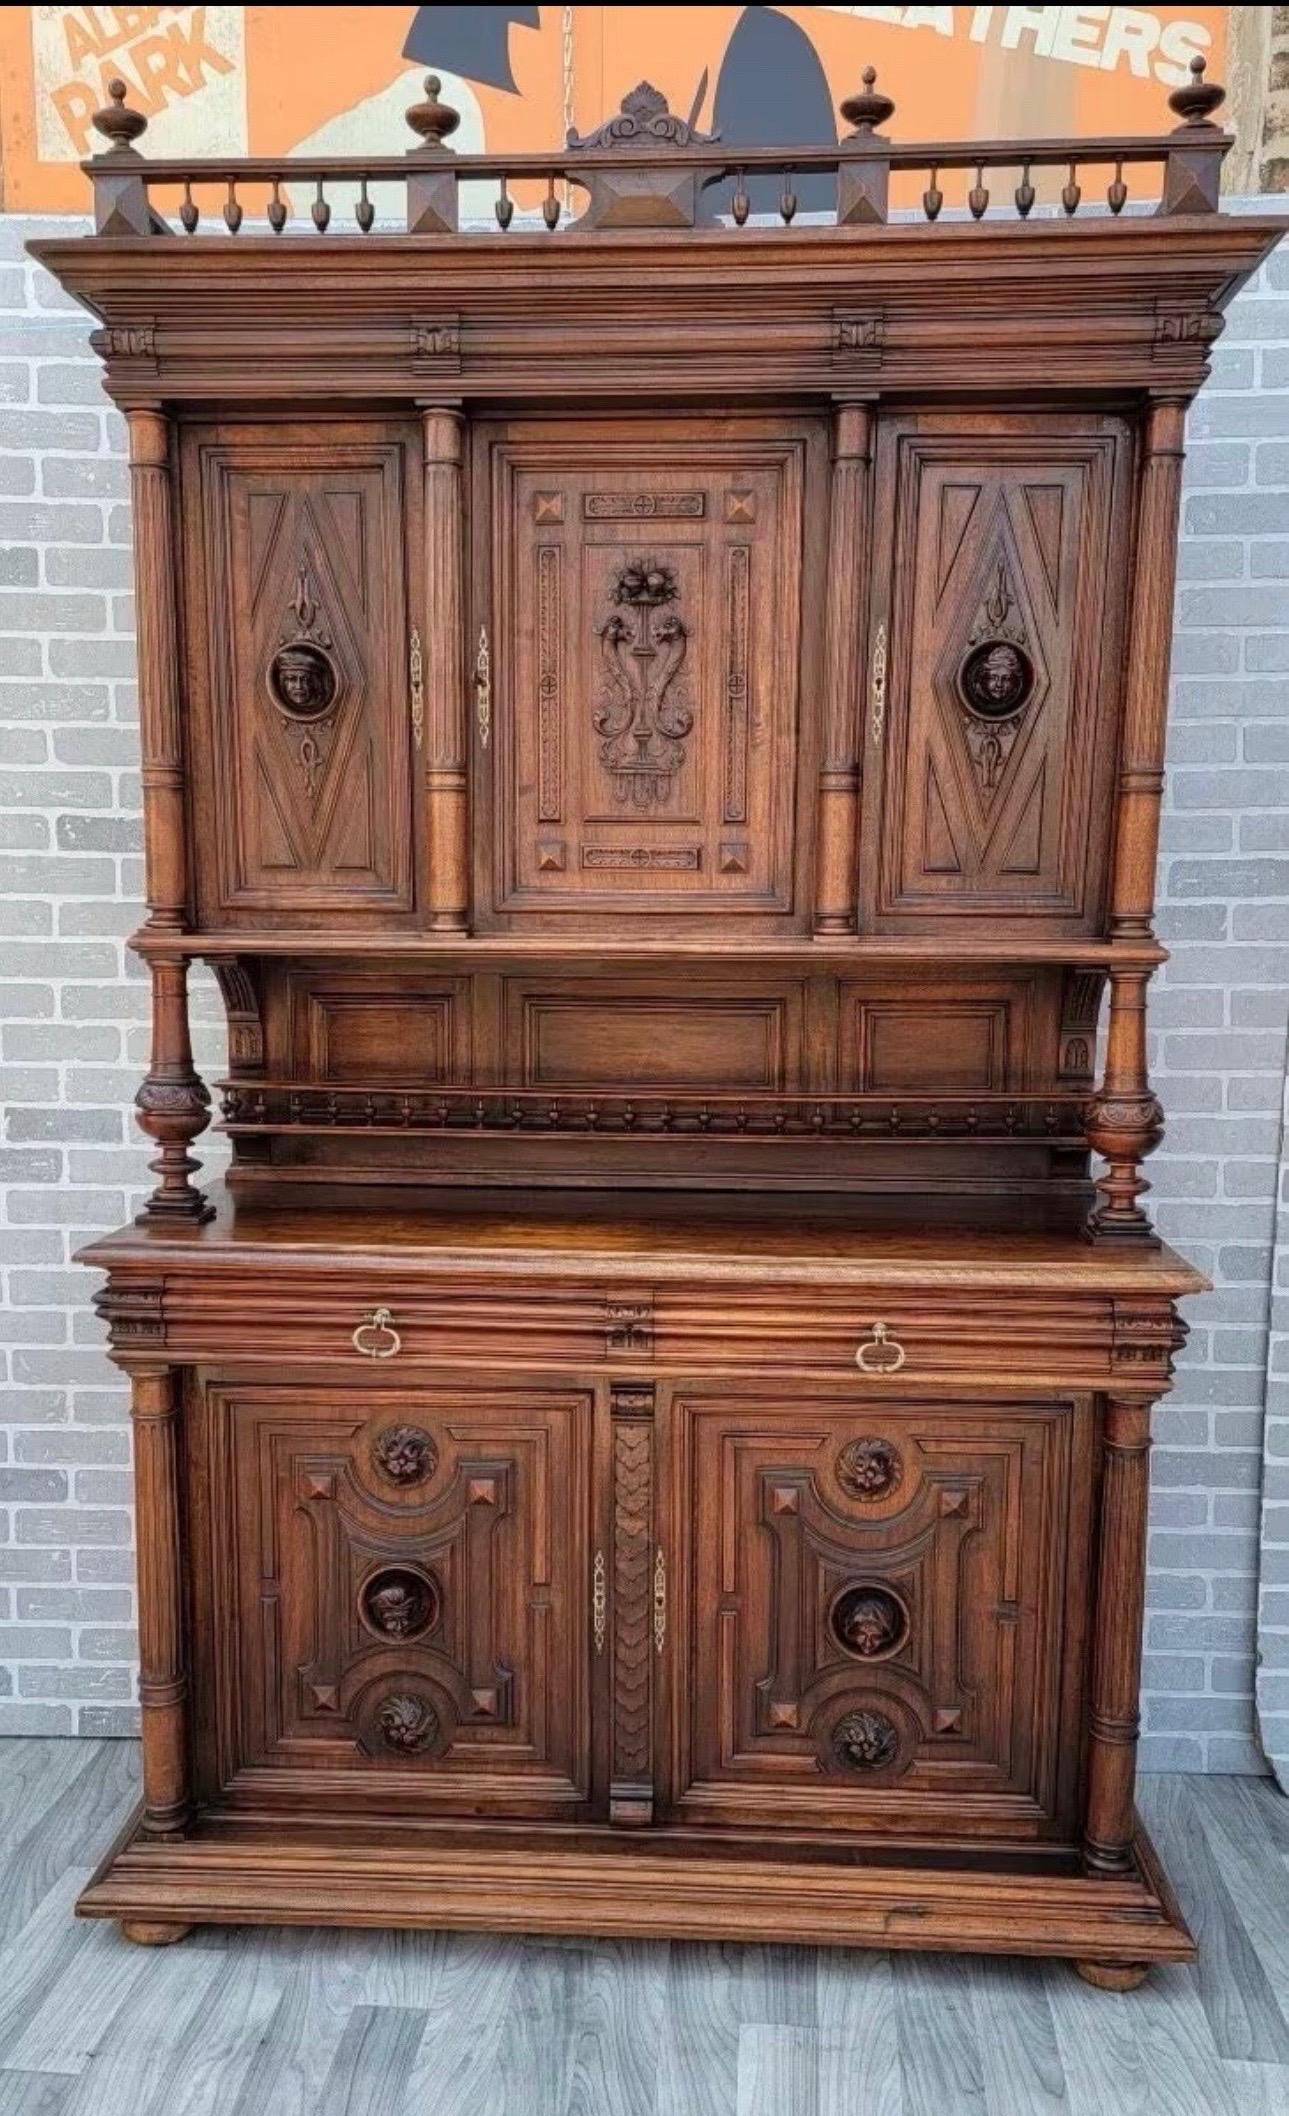 19th Century Antique French Gothic Figural Carved Walnut Chateau Buffet Sideboard Cabinet For Sale